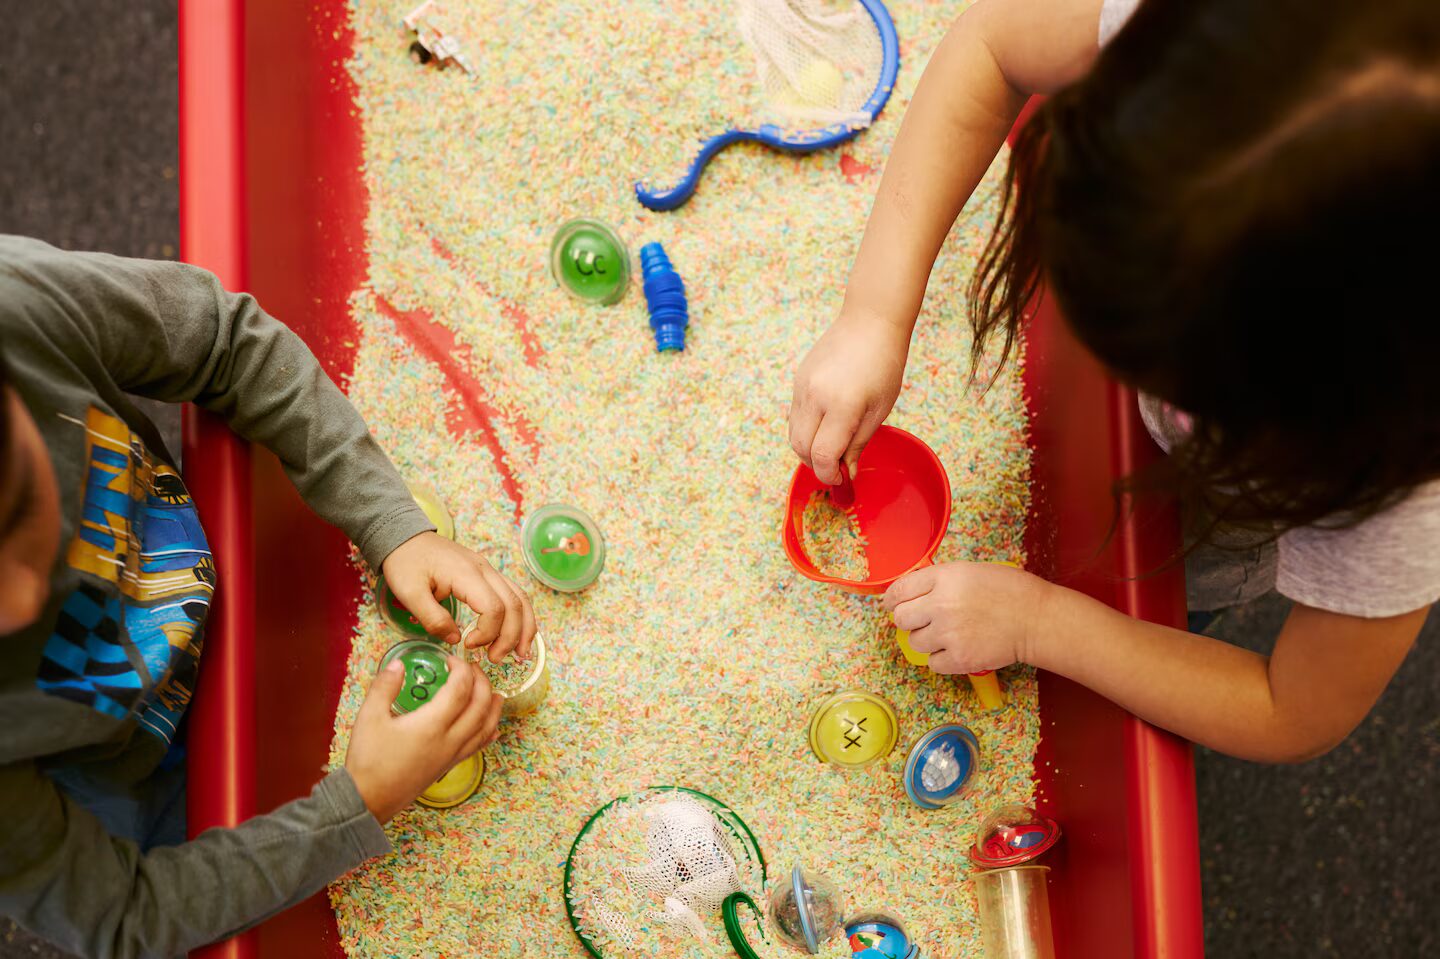 Colorado public preschool: Rop down view of ywo preschool children playing in sand table with colorful tots